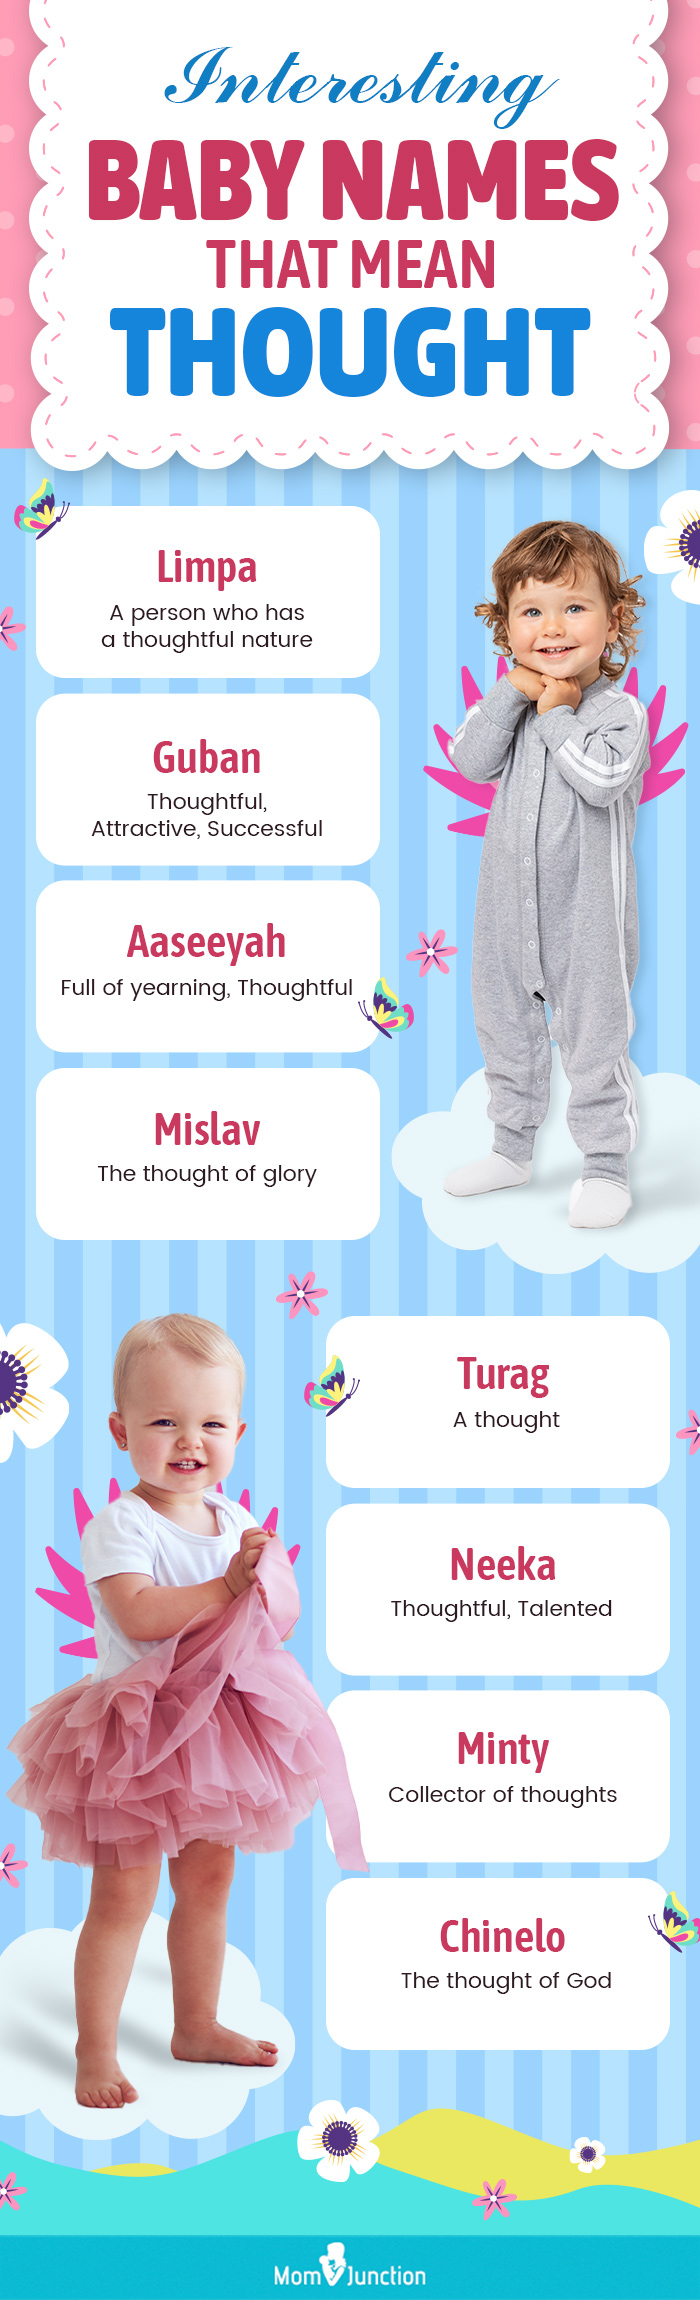 interesting baby names that mean thought (infographic)